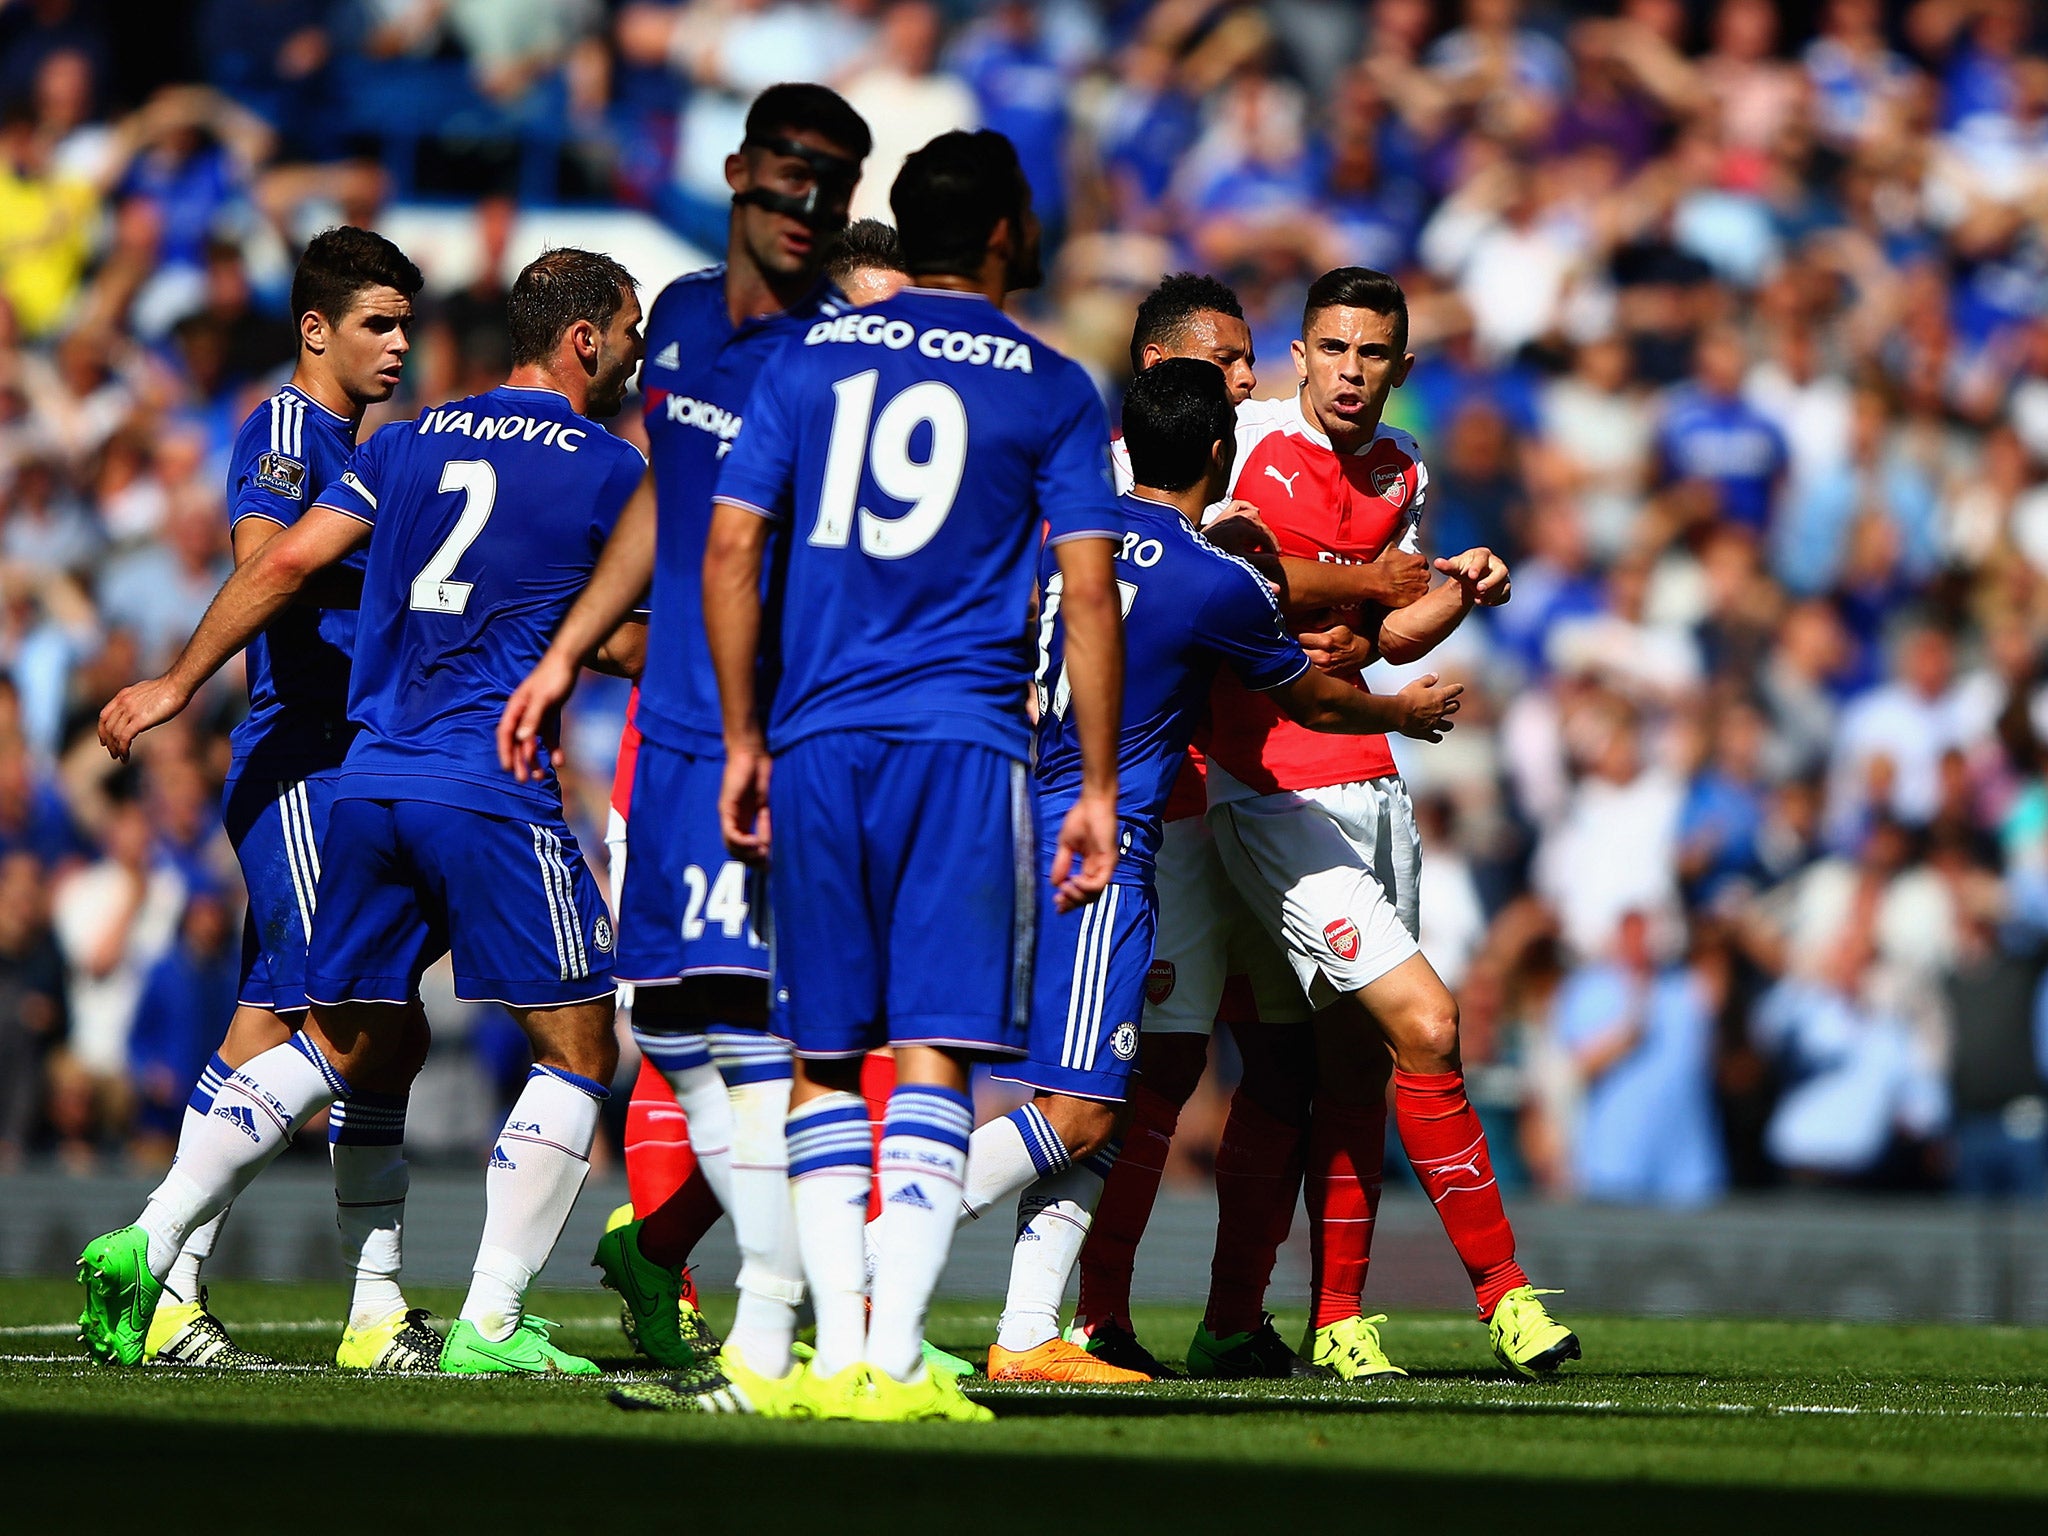 Diego Costa and Gabriel square up during Chelsea's clash with Arsenal